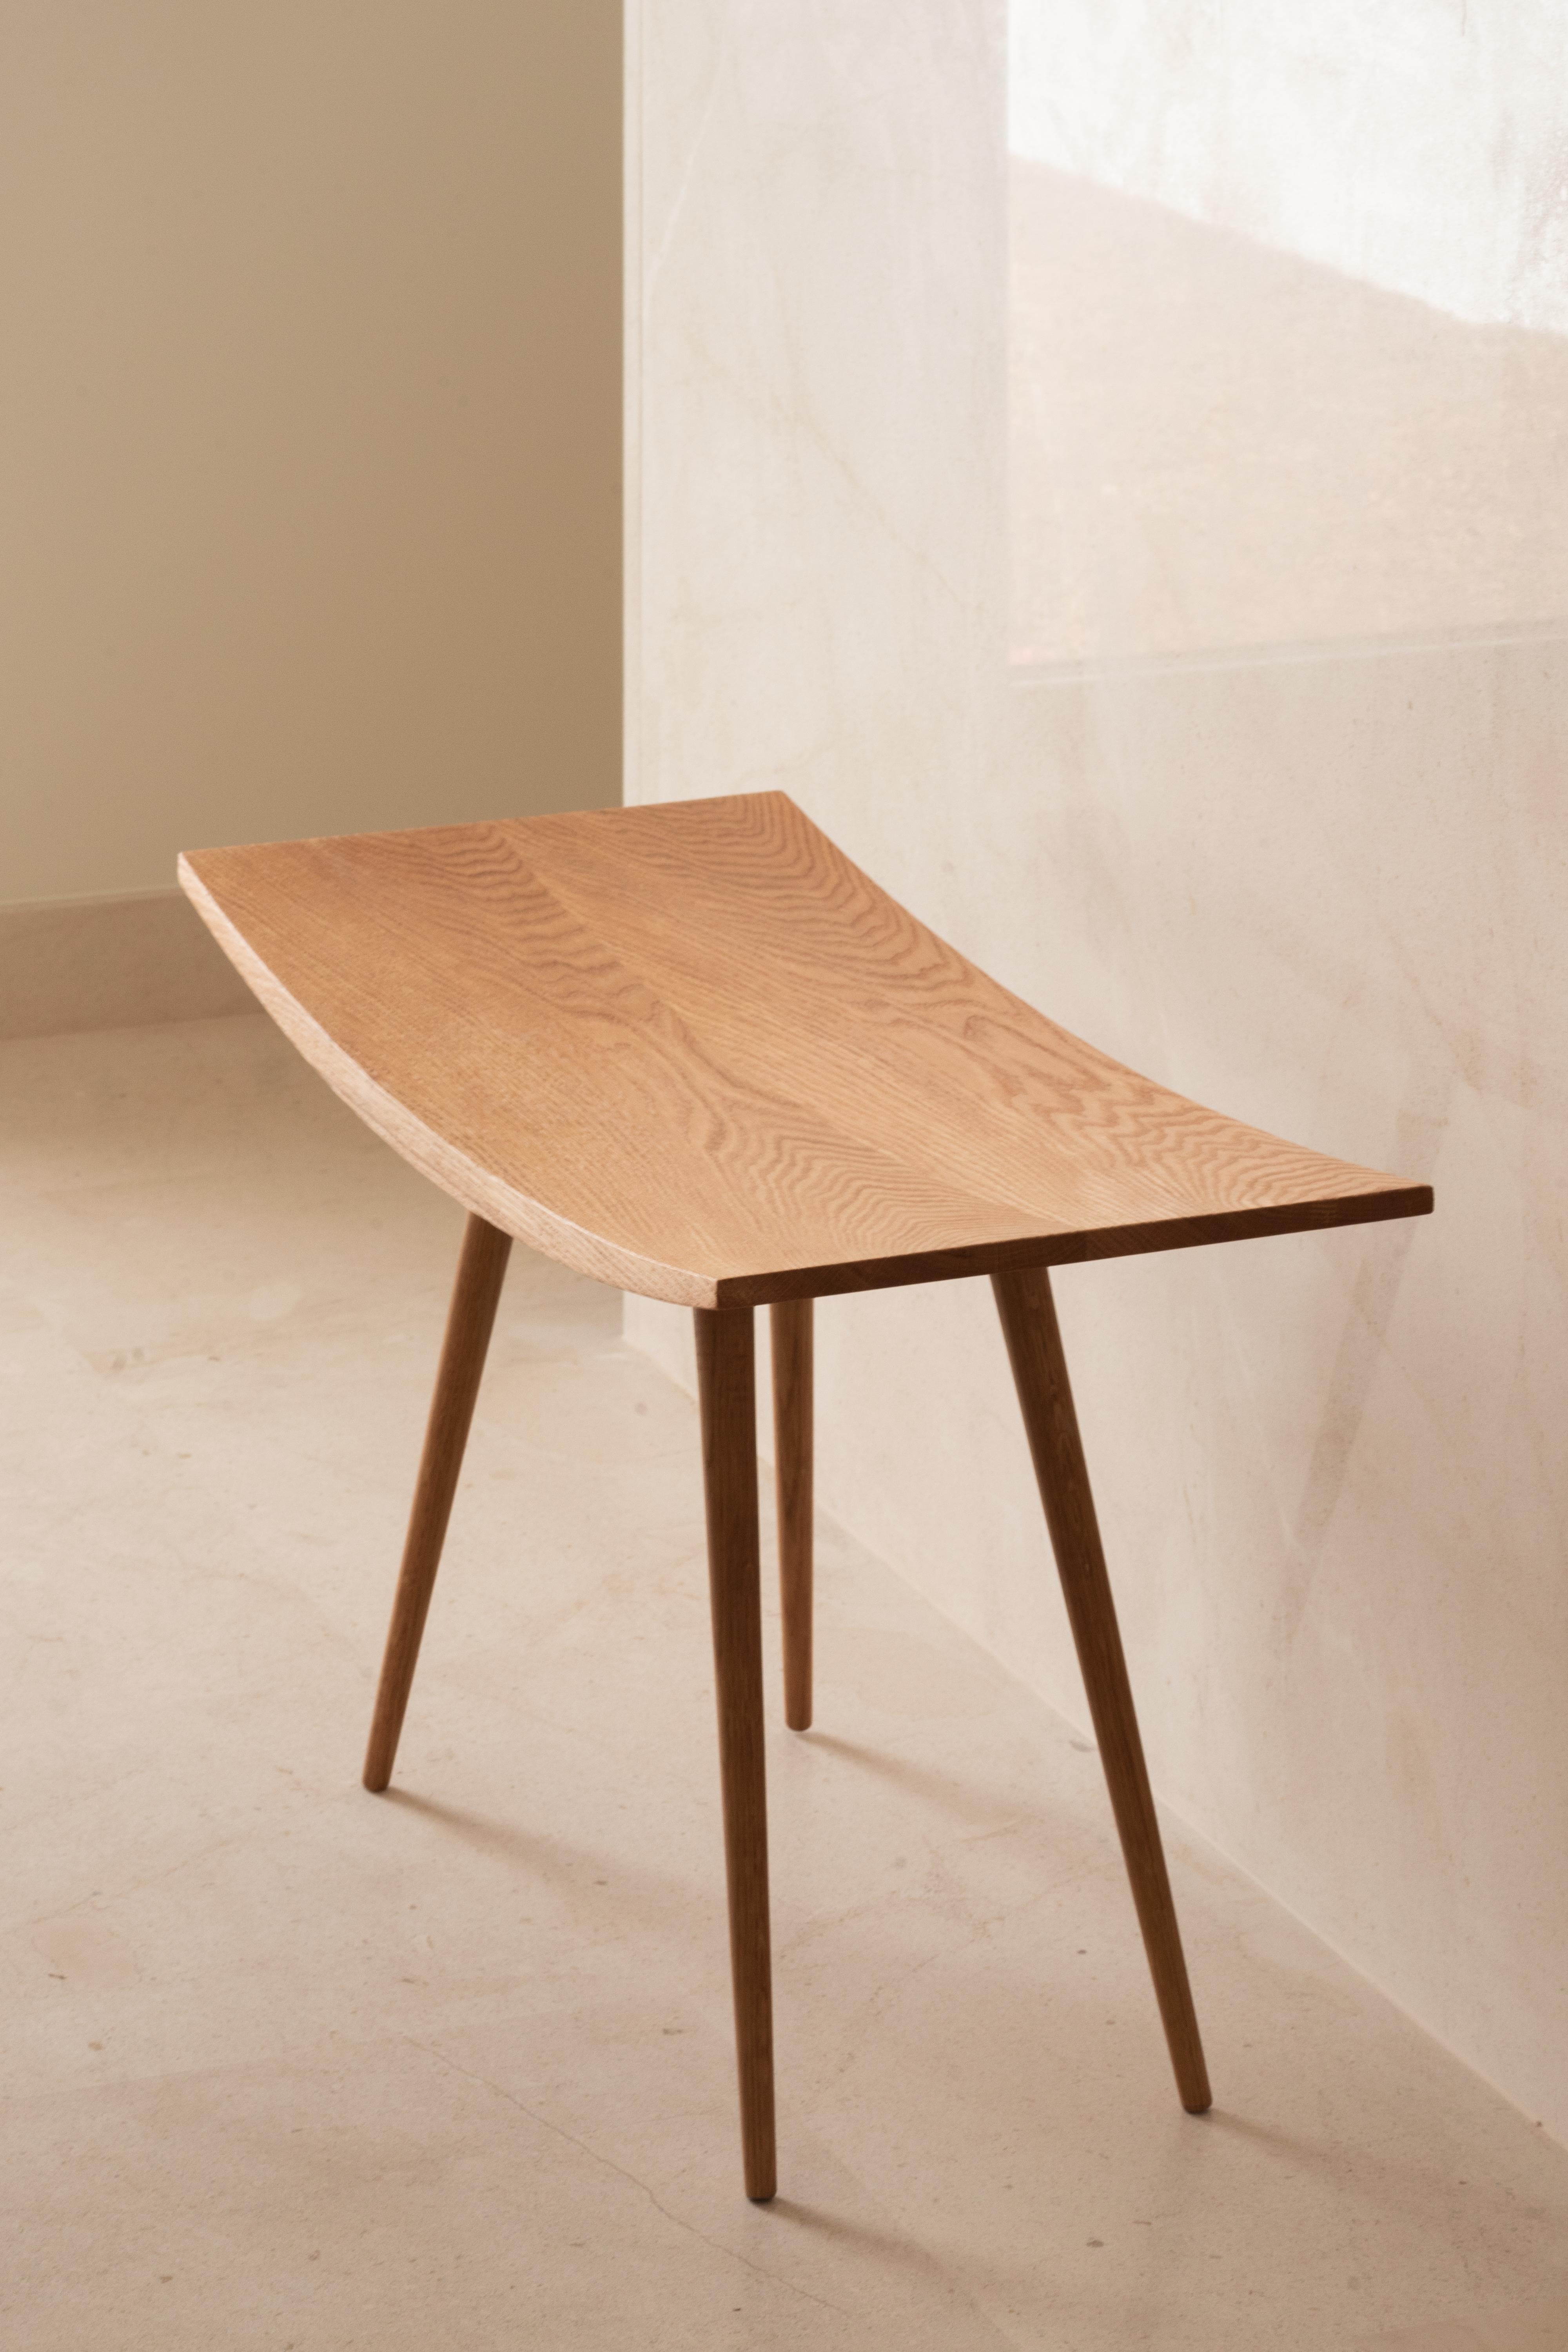 Moji stool by Iterare Arquitectos
Dimensions: D 80 x W 37 x H 58 cm
Materials: Seat, legs and backrest: Wood (in two options: Oak, Beech), Structure: Steel (in two options), Polished stainless steel or black lacquered steel.
Materials and